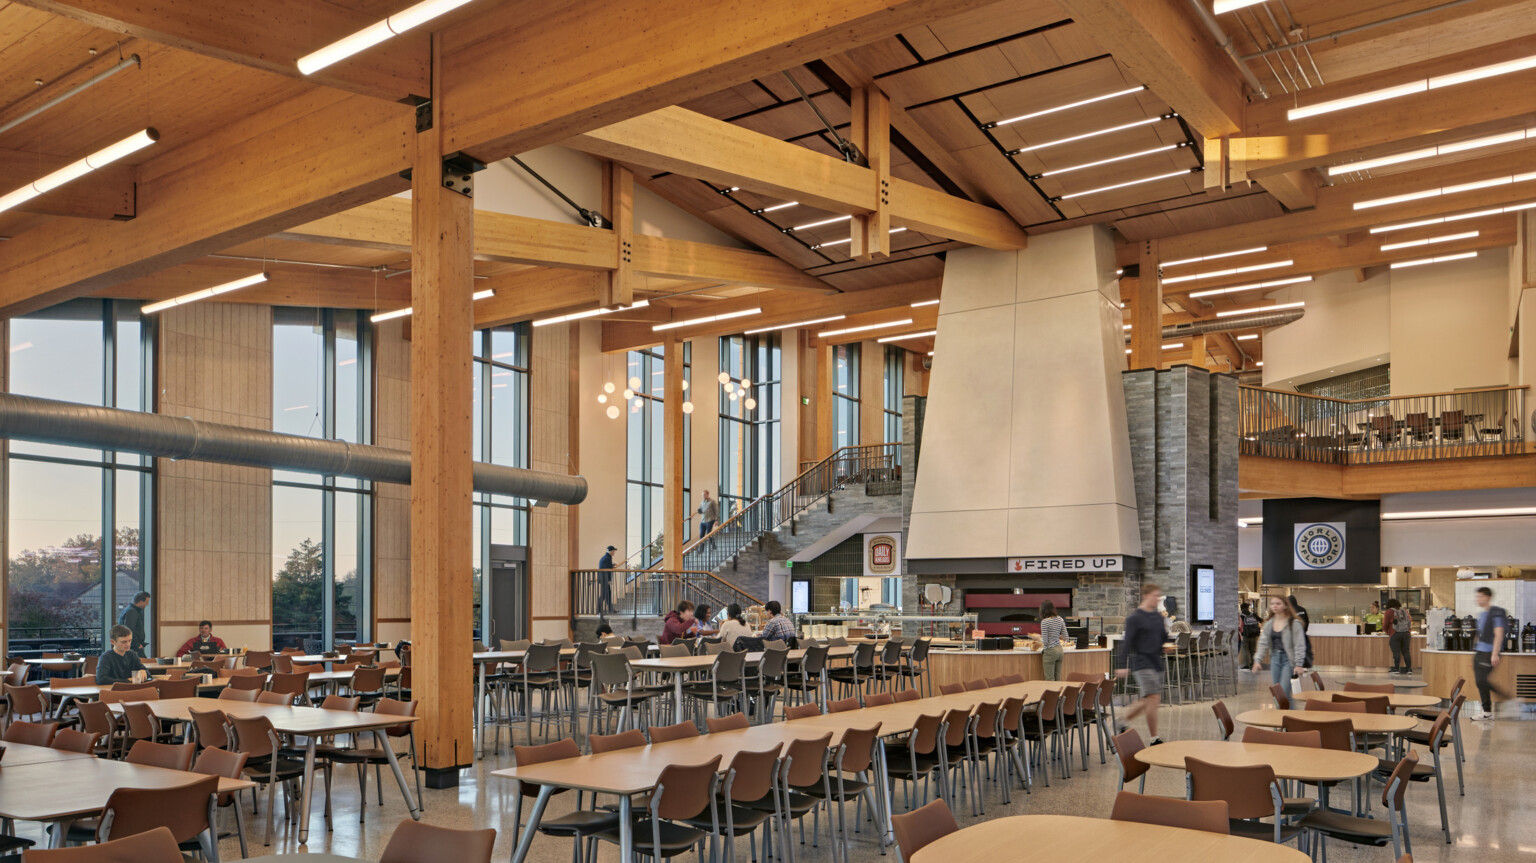 large two-story glass dining hall with exposed timber beams and posts, stone wrapped stair leading to second floor seating area